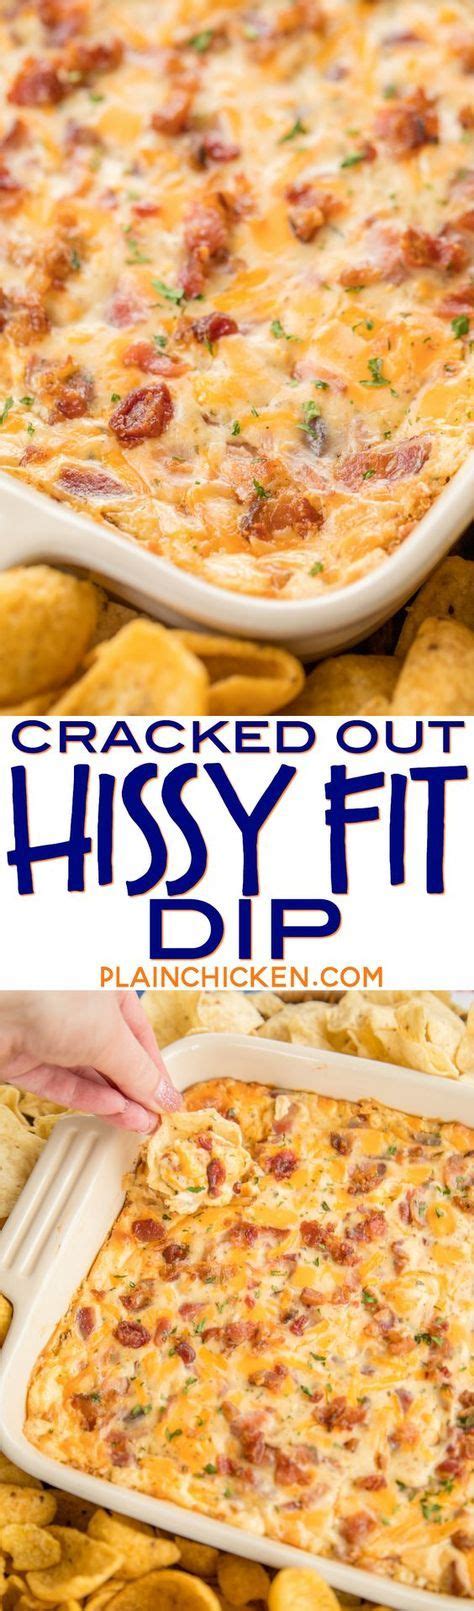 Processing extends shelf life and allows manufacturers to make a uniform, consistent product. Cracked Out Hissy Fit Dip Recipe - cheddar, bacon, ranch ...